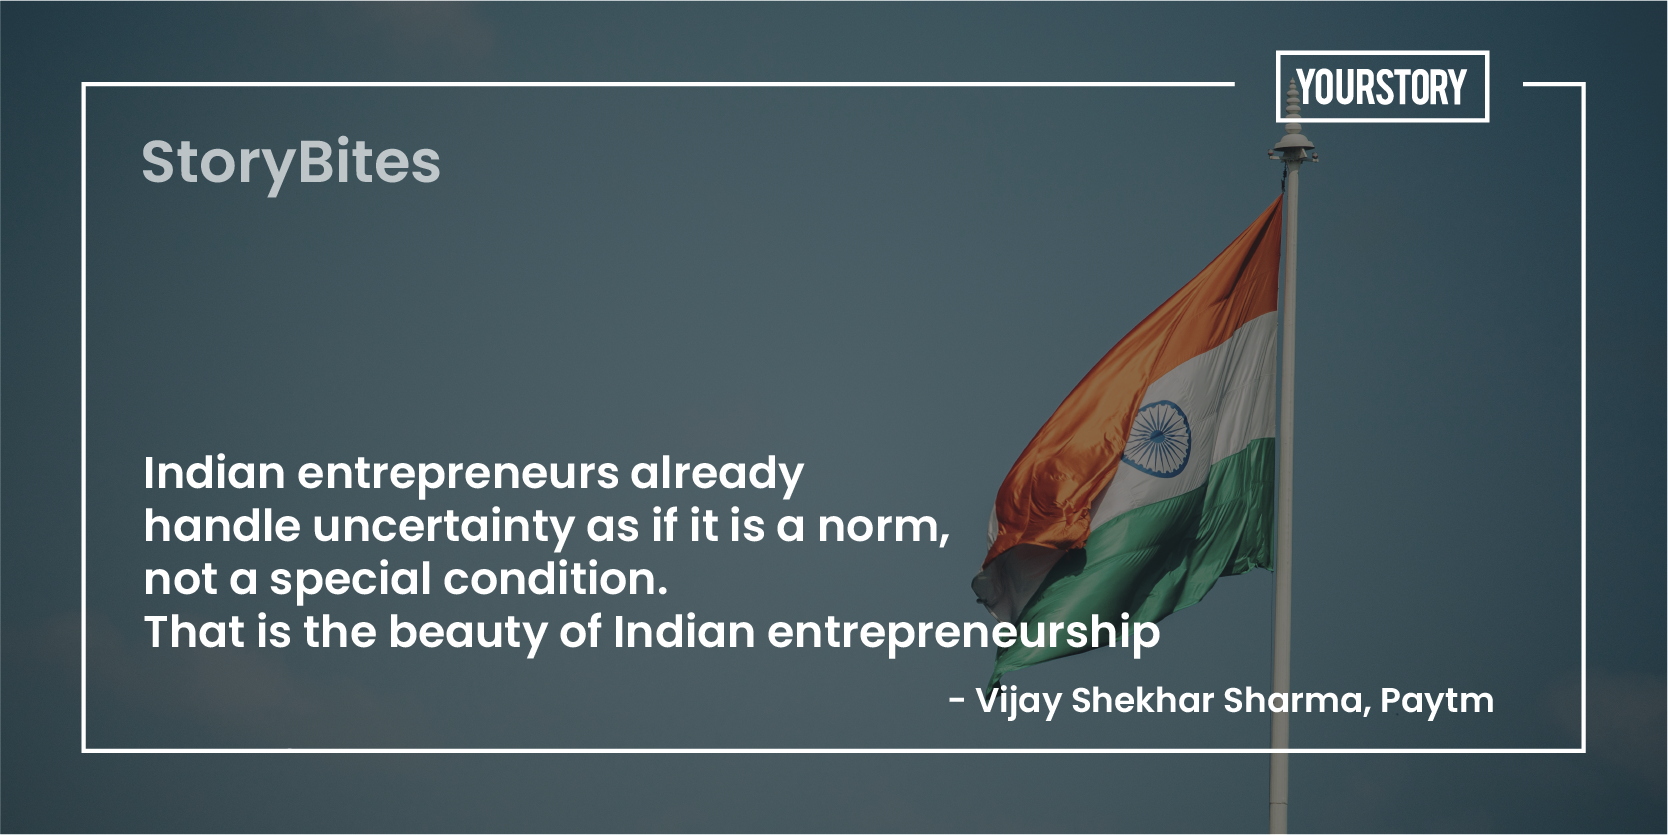 ‘Indian entrepreneurs already handle uncertainty as if it is a norm’ – 30 weekly quotes on Indian business opportunities and strengths